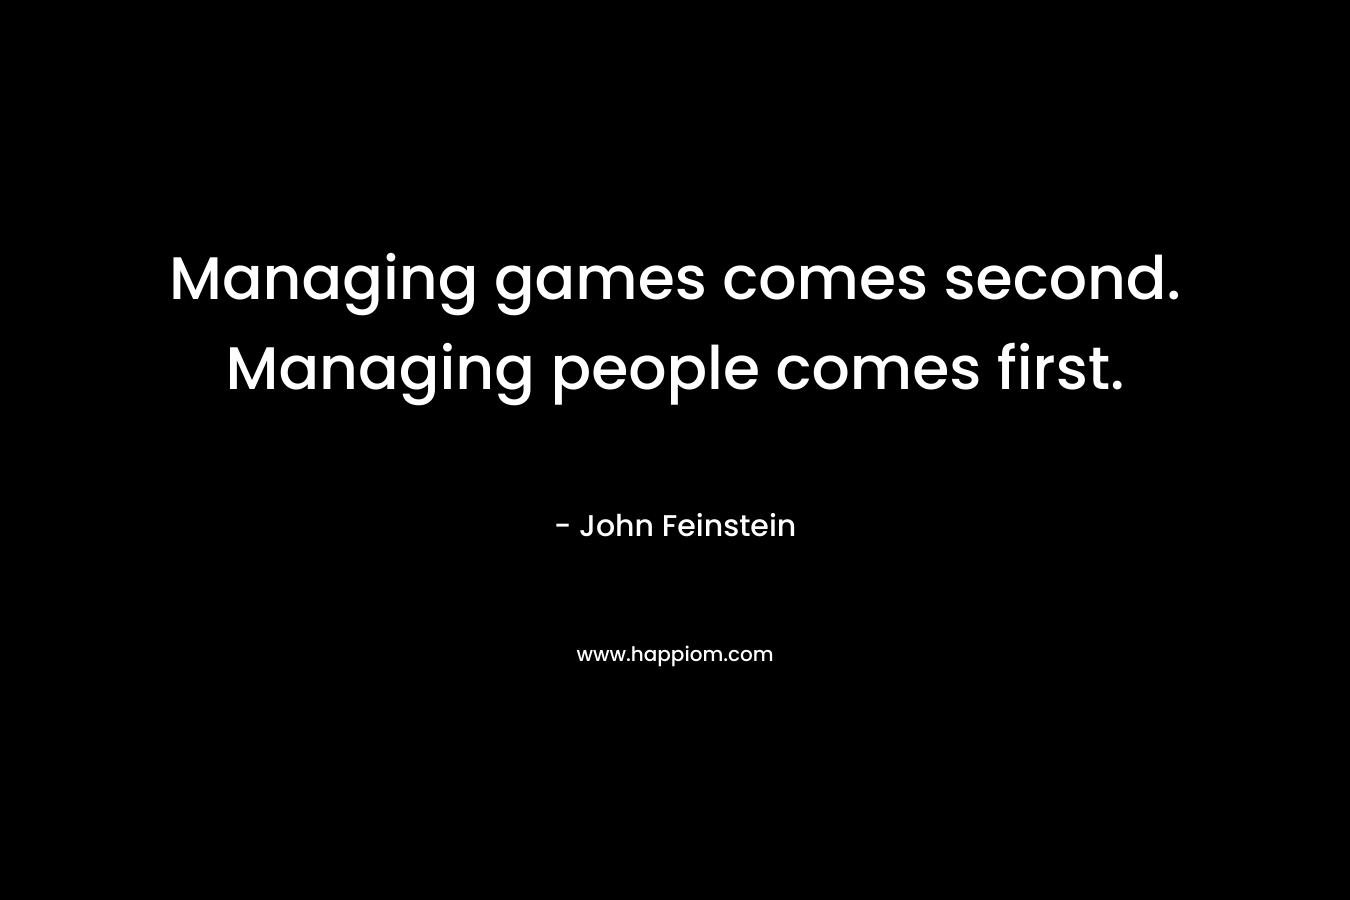 Managing games comes second. Managing people comes first. – John Feinstein